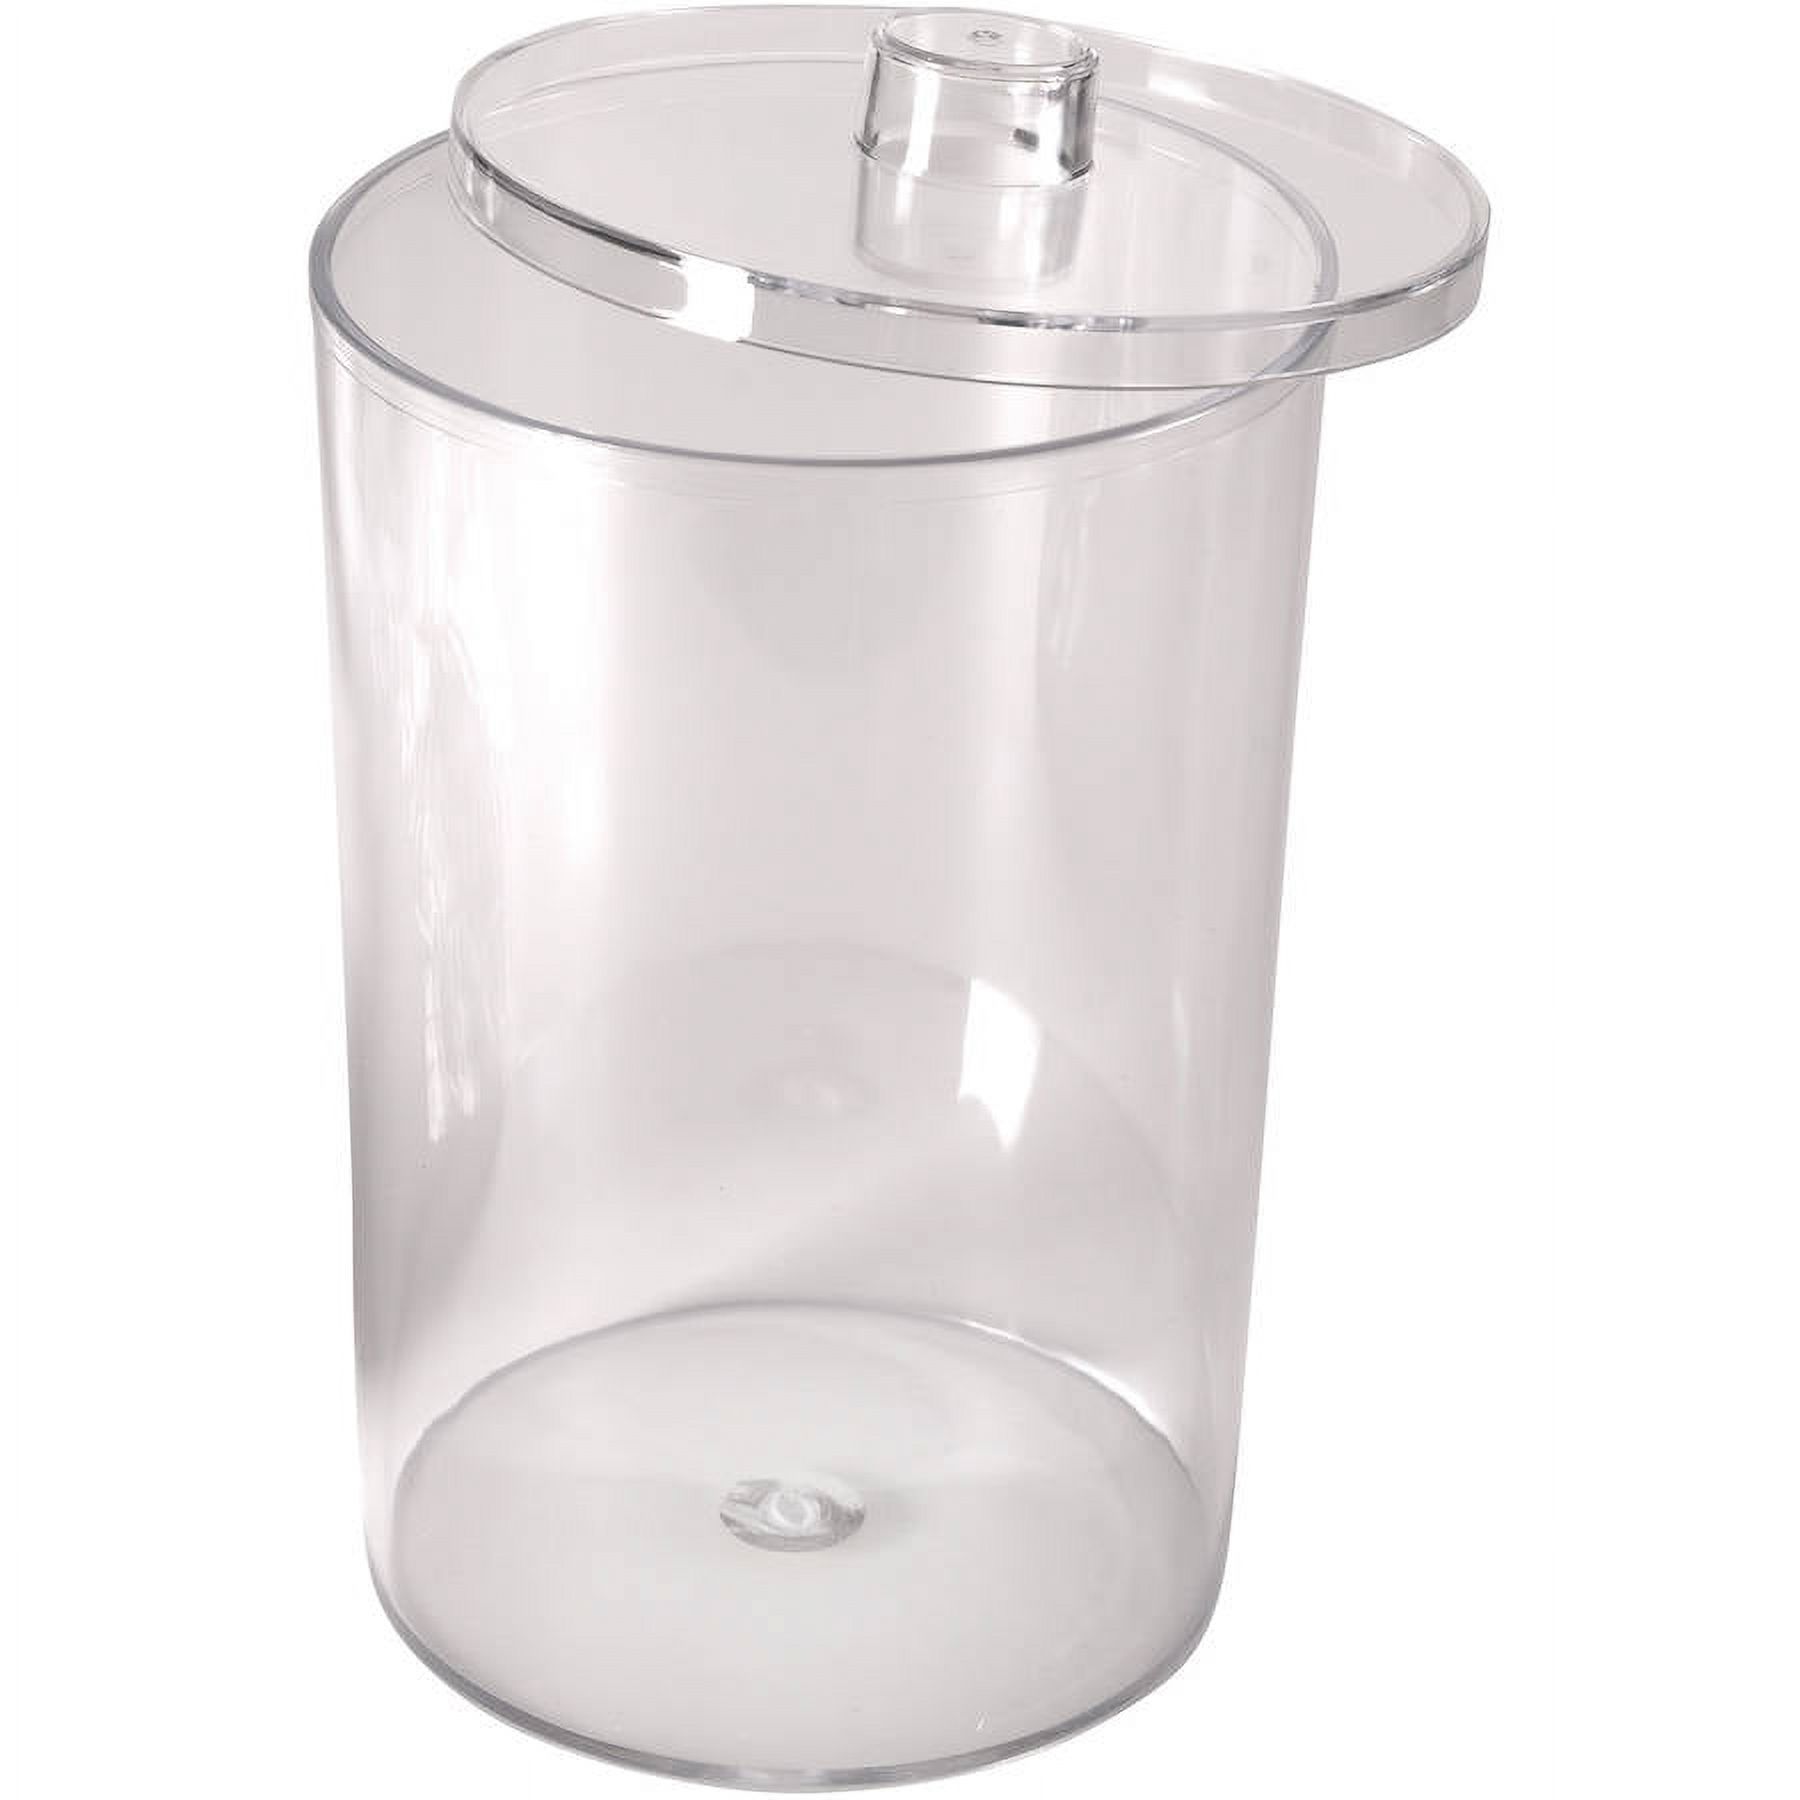 MABIS Apothecary Jar, Medical Container Sundry Jar with Lid for Home or Medical Doctor's Office, Clear - image 2 of 3